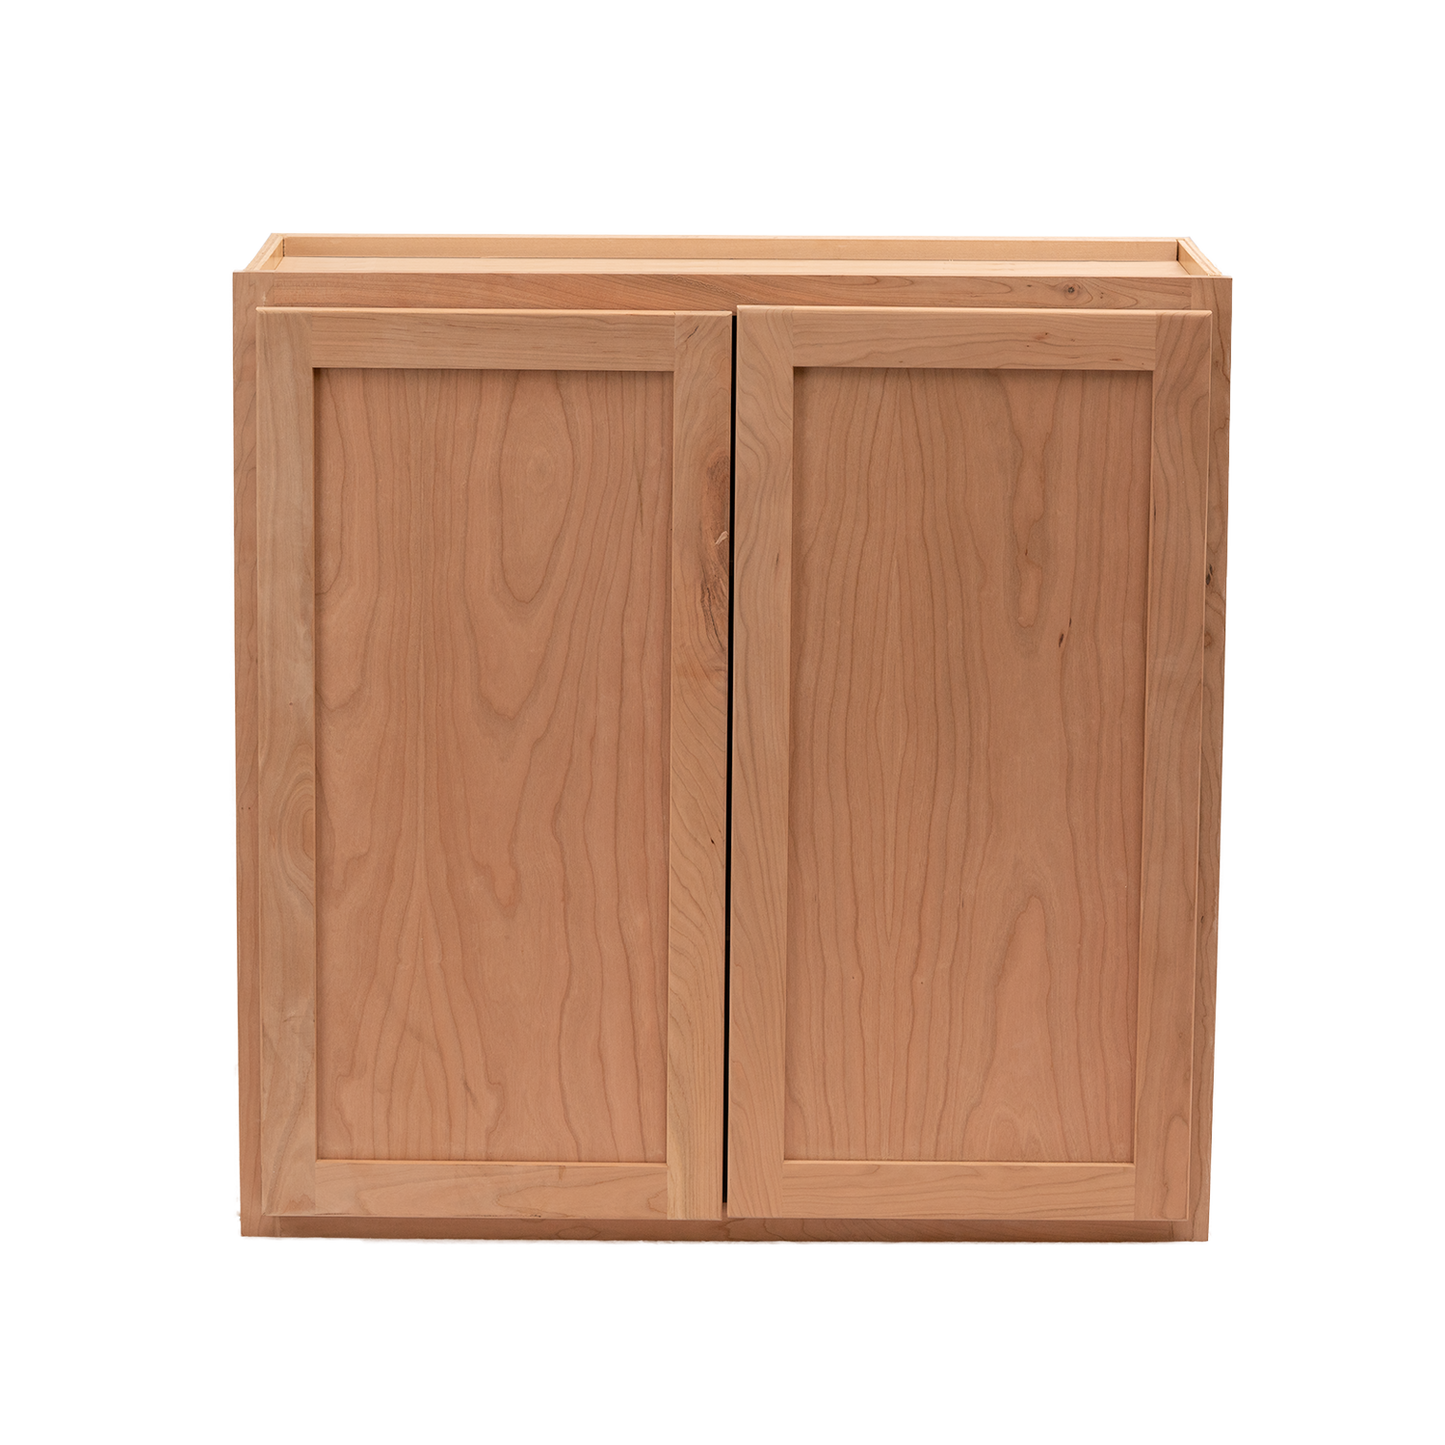 Quicklock RTA (Ready-to-Assemble) Raw Cherry Wall Cabinet- 30", 33", 36" W x 30" H